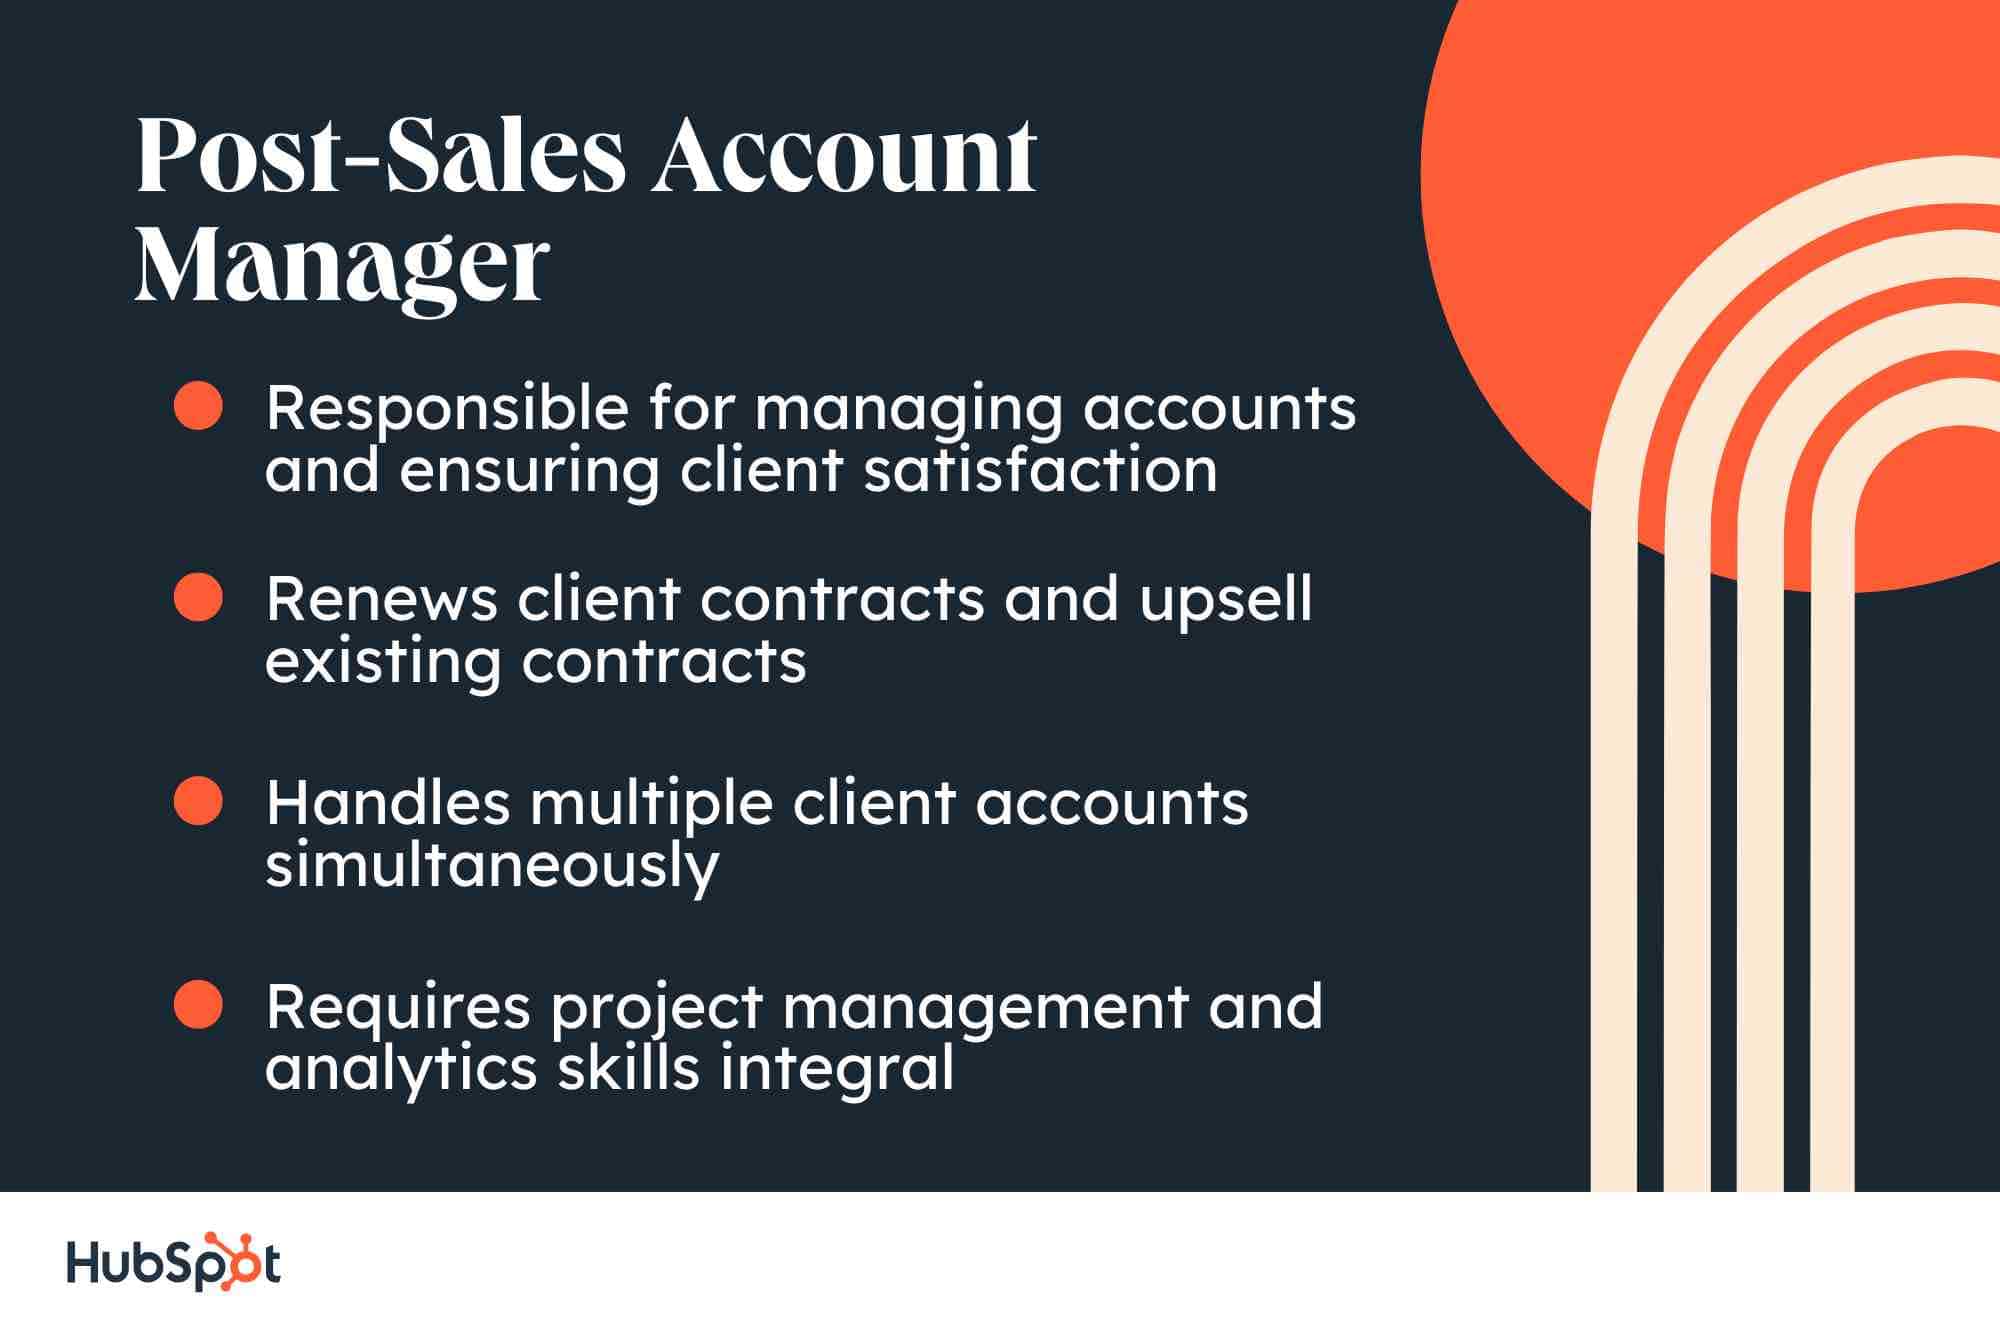 Post-Sales Account Manager. Responsible for managing accounts and ensuring client satisfaction. Renews client contracts and upsell existing contracts. Handles multiple client accounts simultaneously. Requires project management and analytics skills integral.